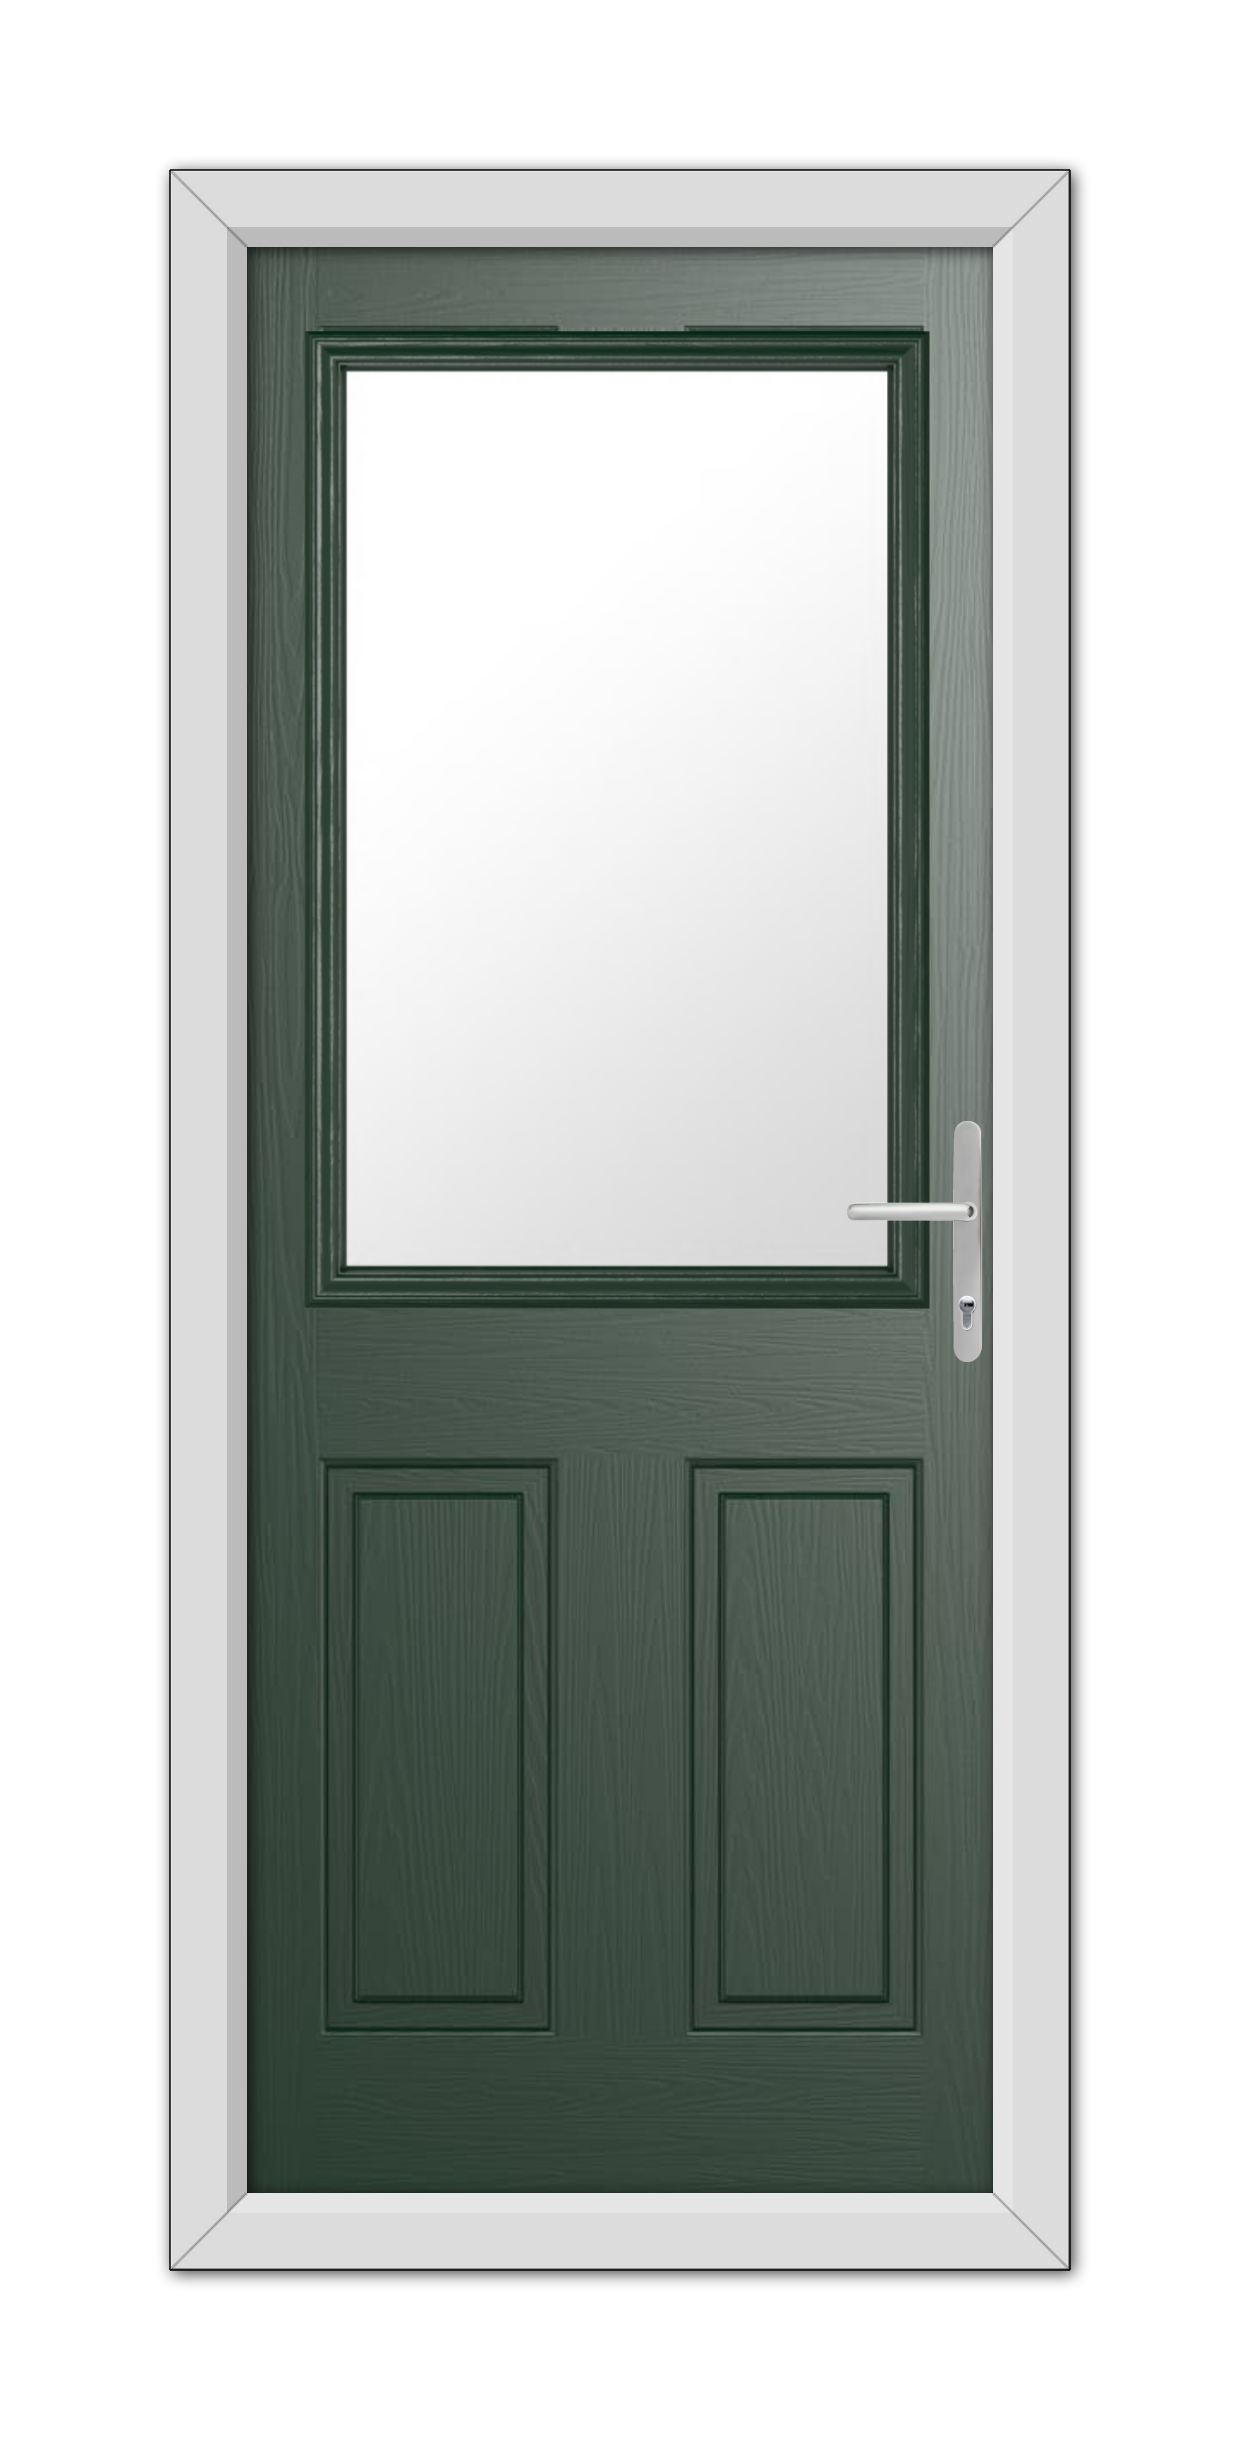 A Green Buxton Composite Door 48mm Timber Core with a large rectangular window at the top, set in a white frame with a modern handle on the right.